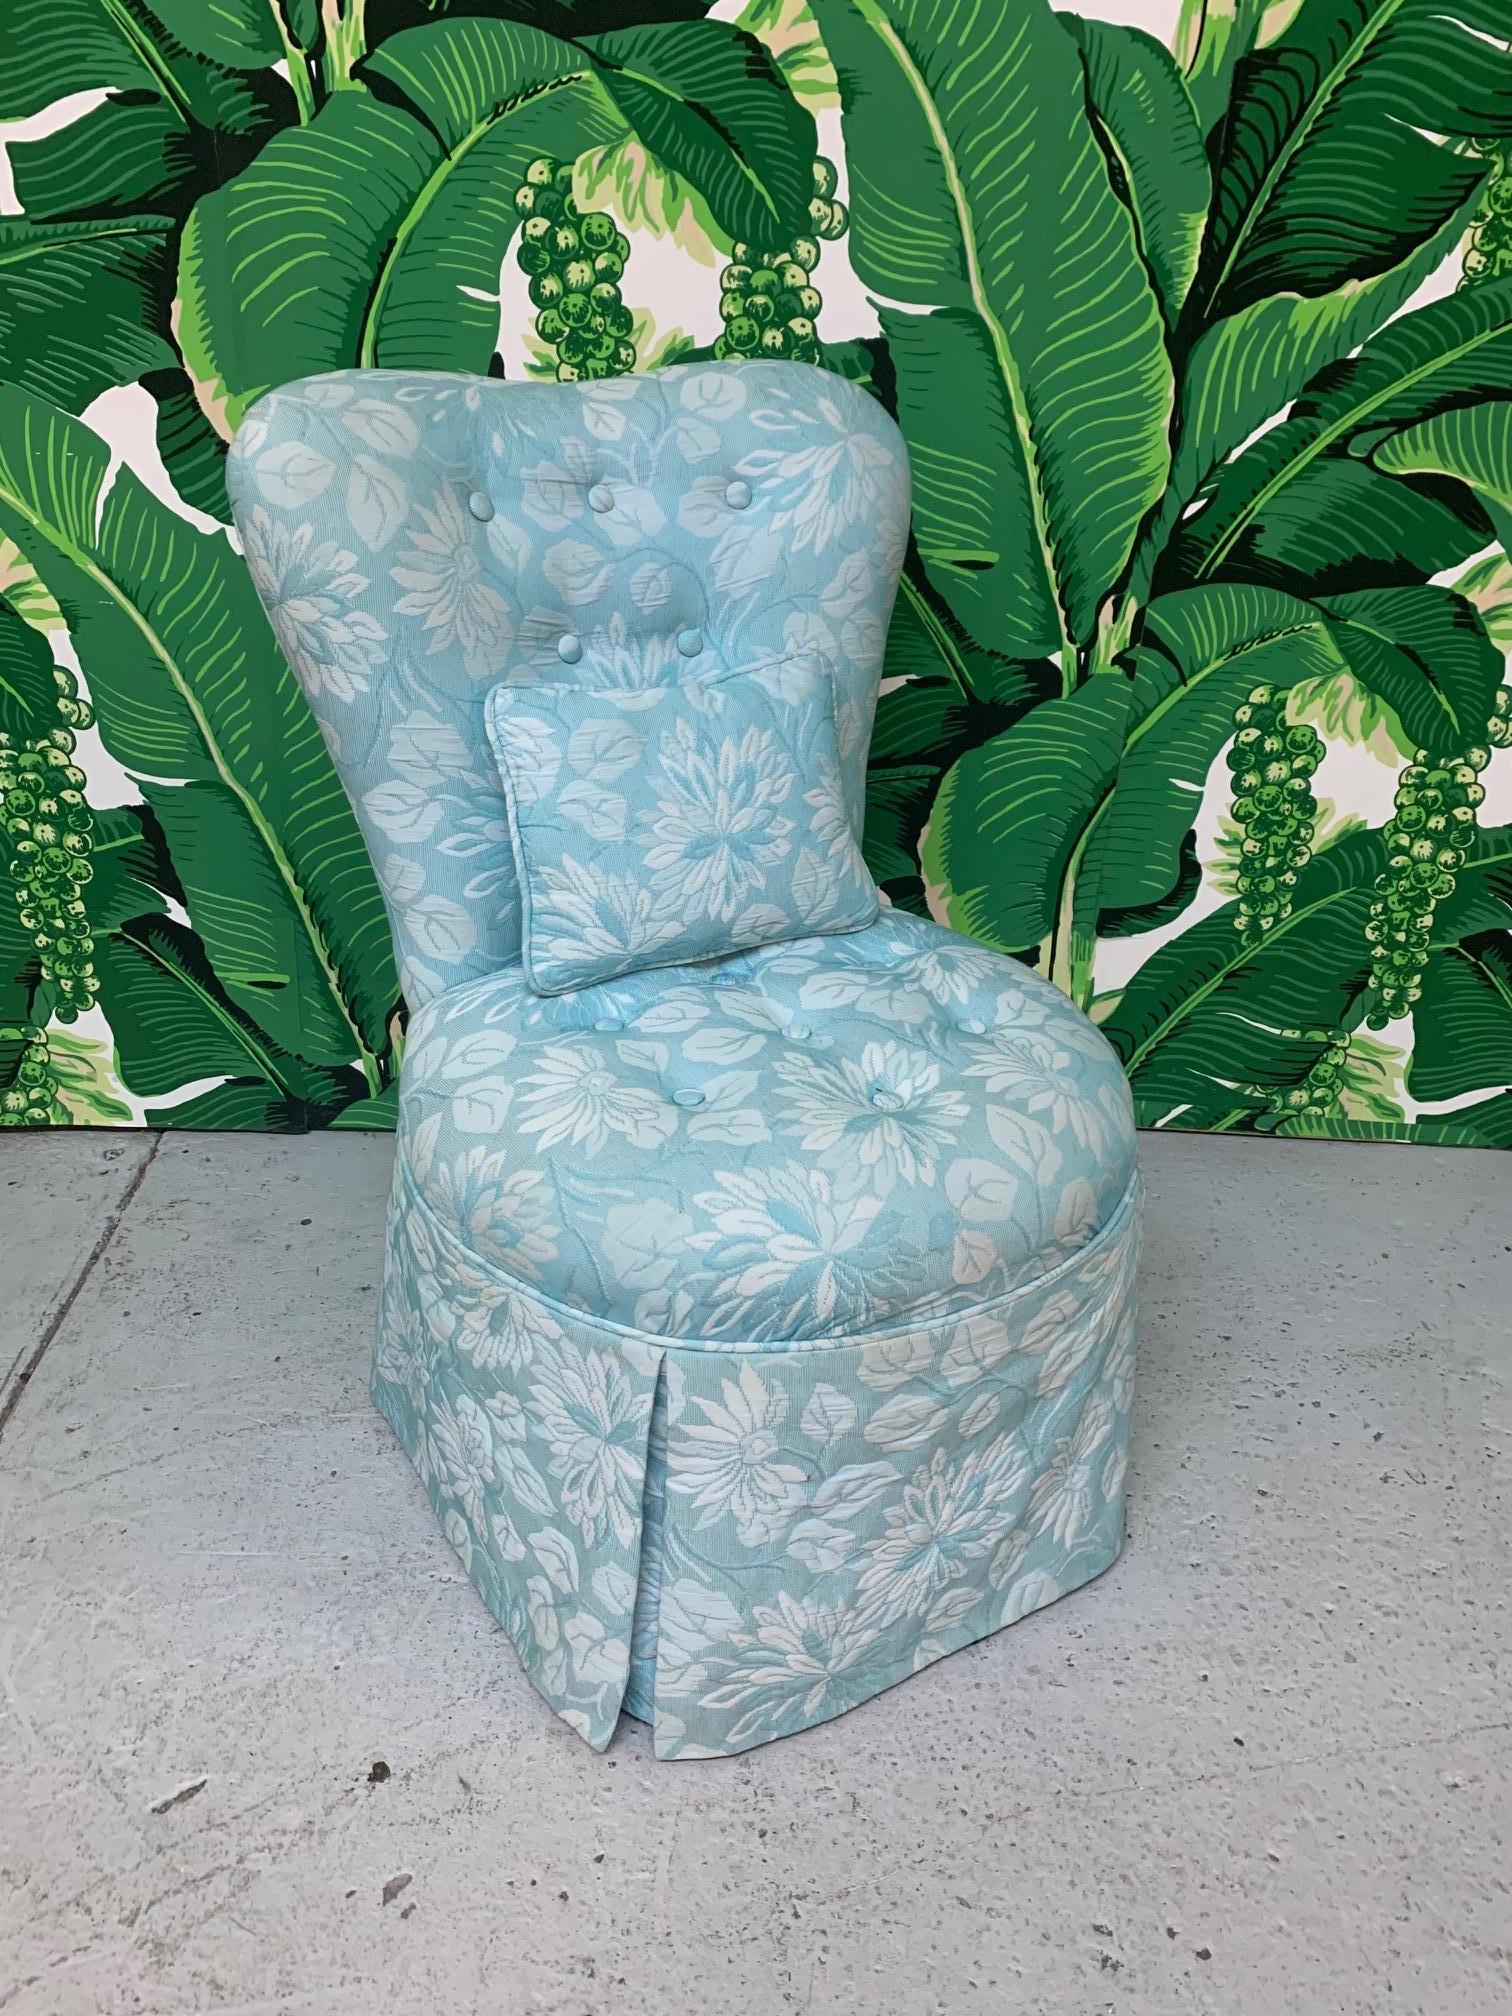 Single vanity chair features soft upholstery and very comfortable seat. Slipper chair style with sculptural back and tone-on-tone print. Excellent condition with no stains, tears or odors.